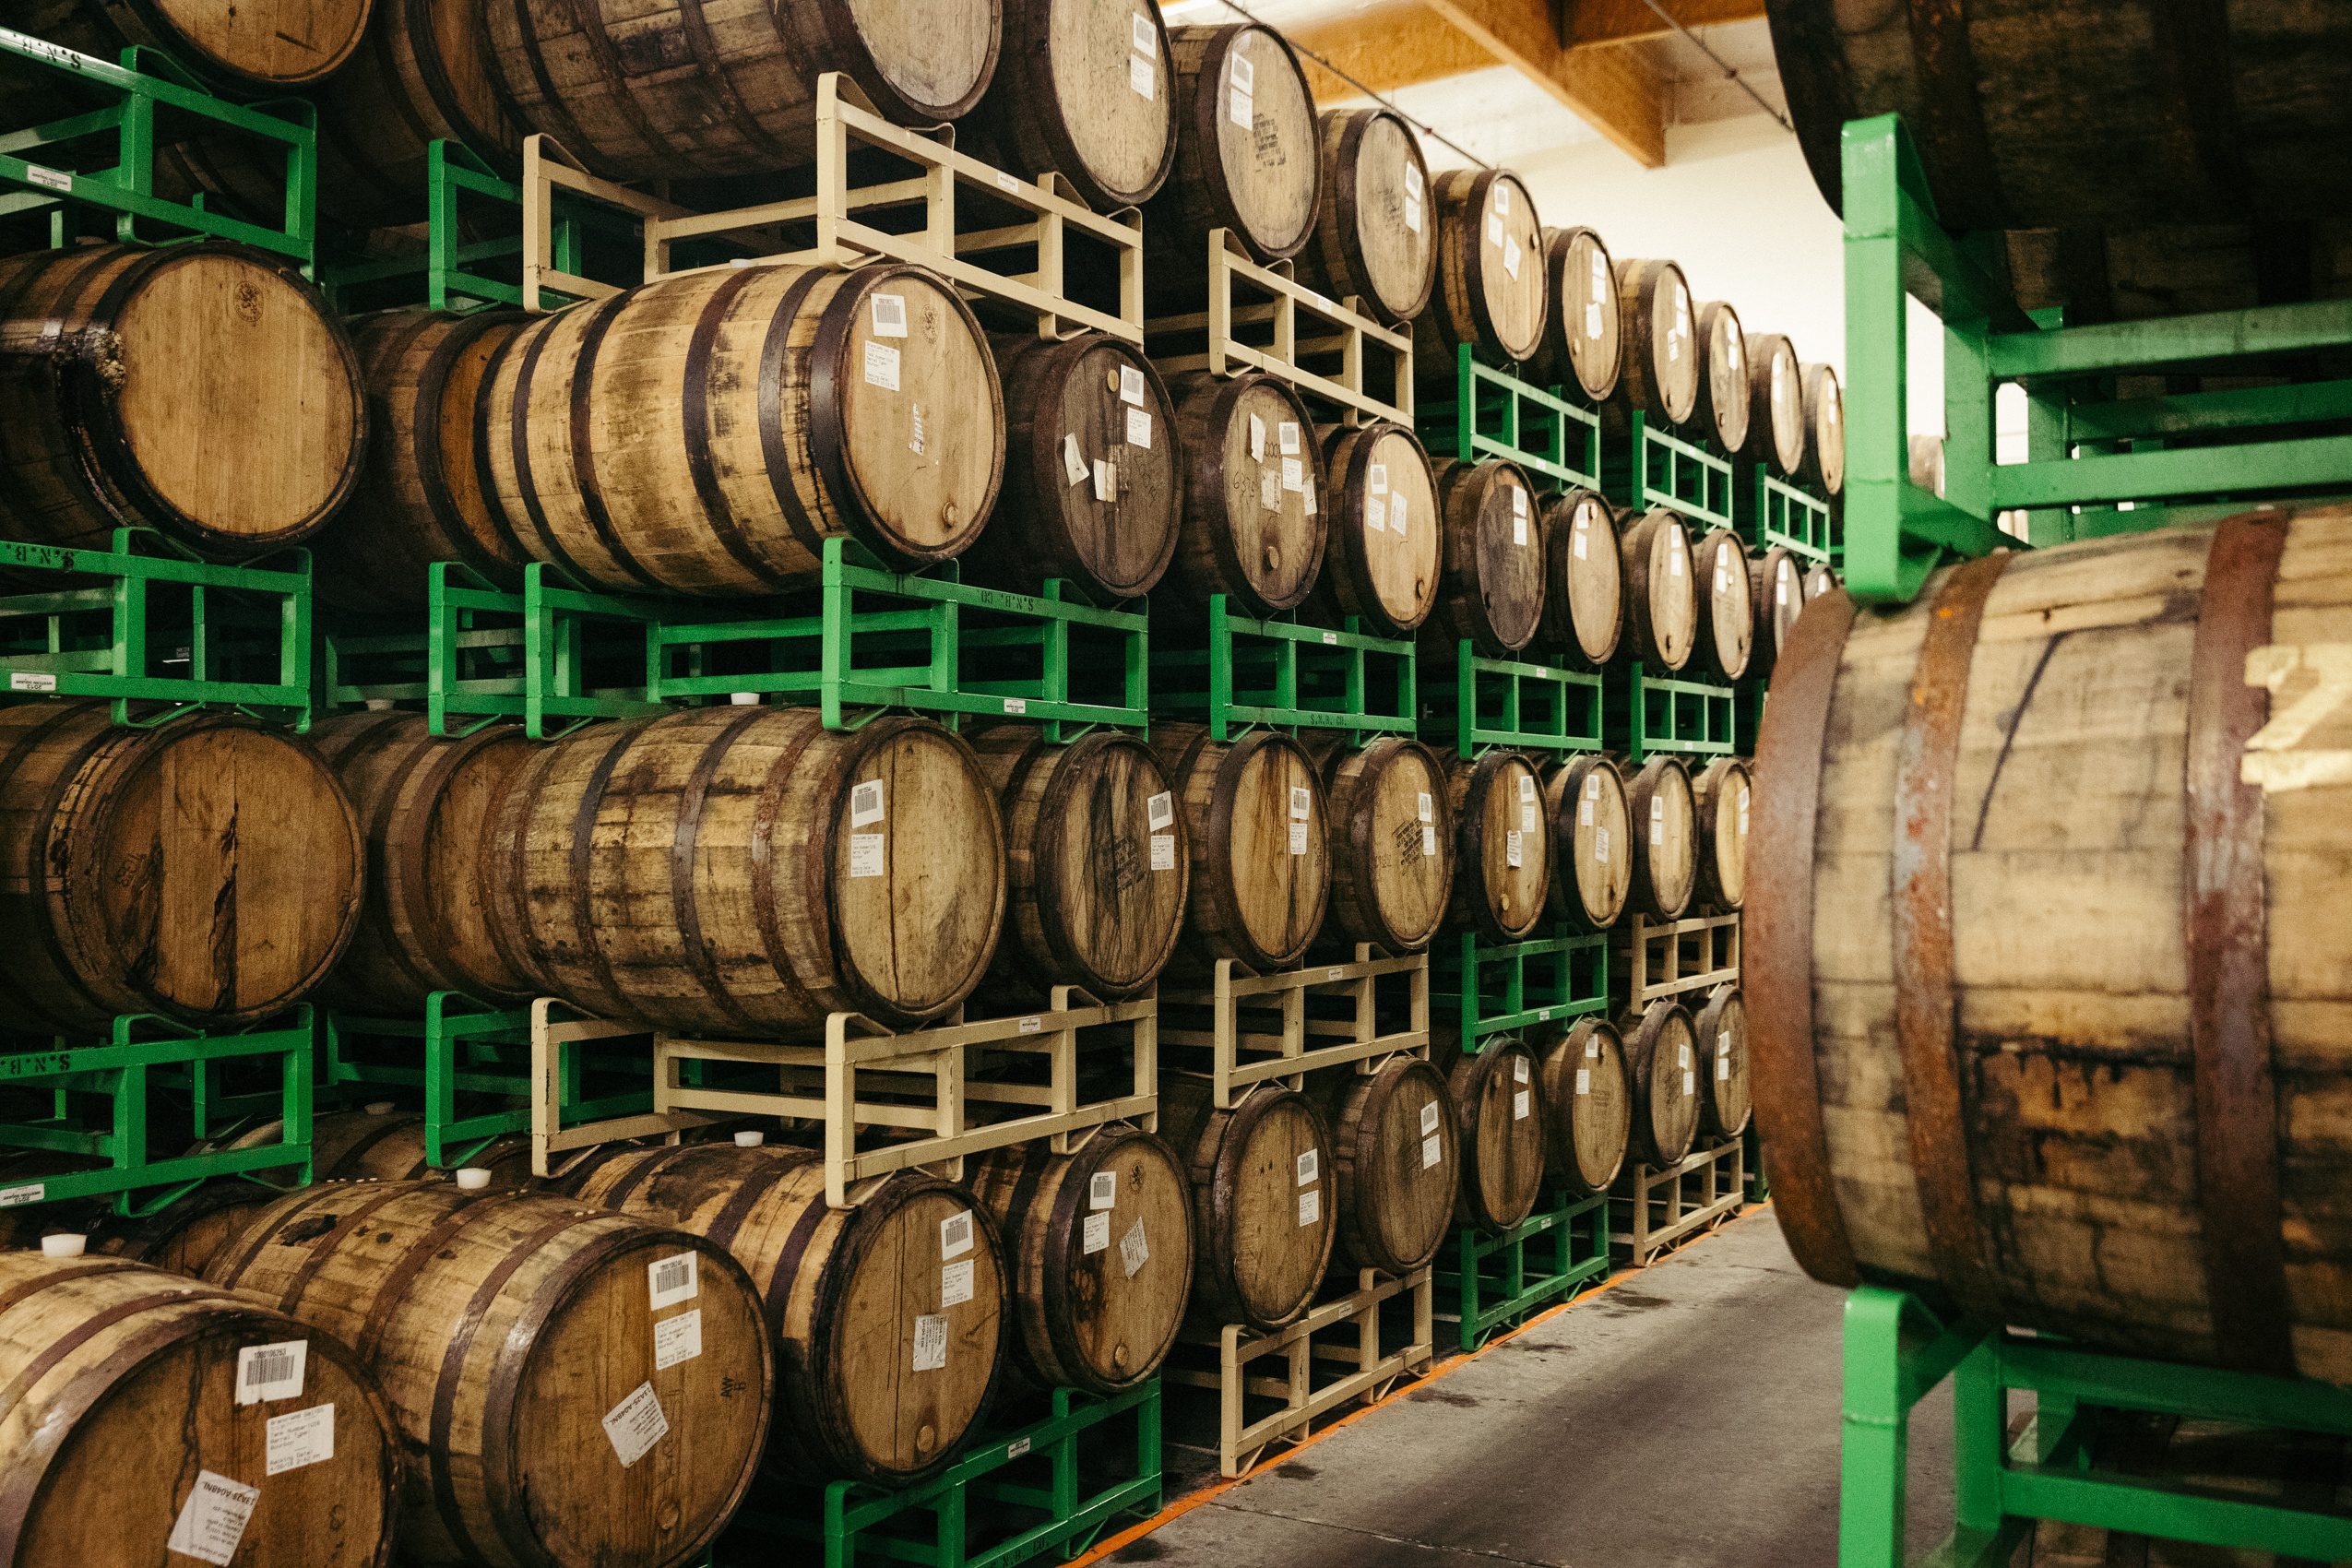 Stacks of barrel aged beer in wooden barrels at Sierra Nevada Brewing Company